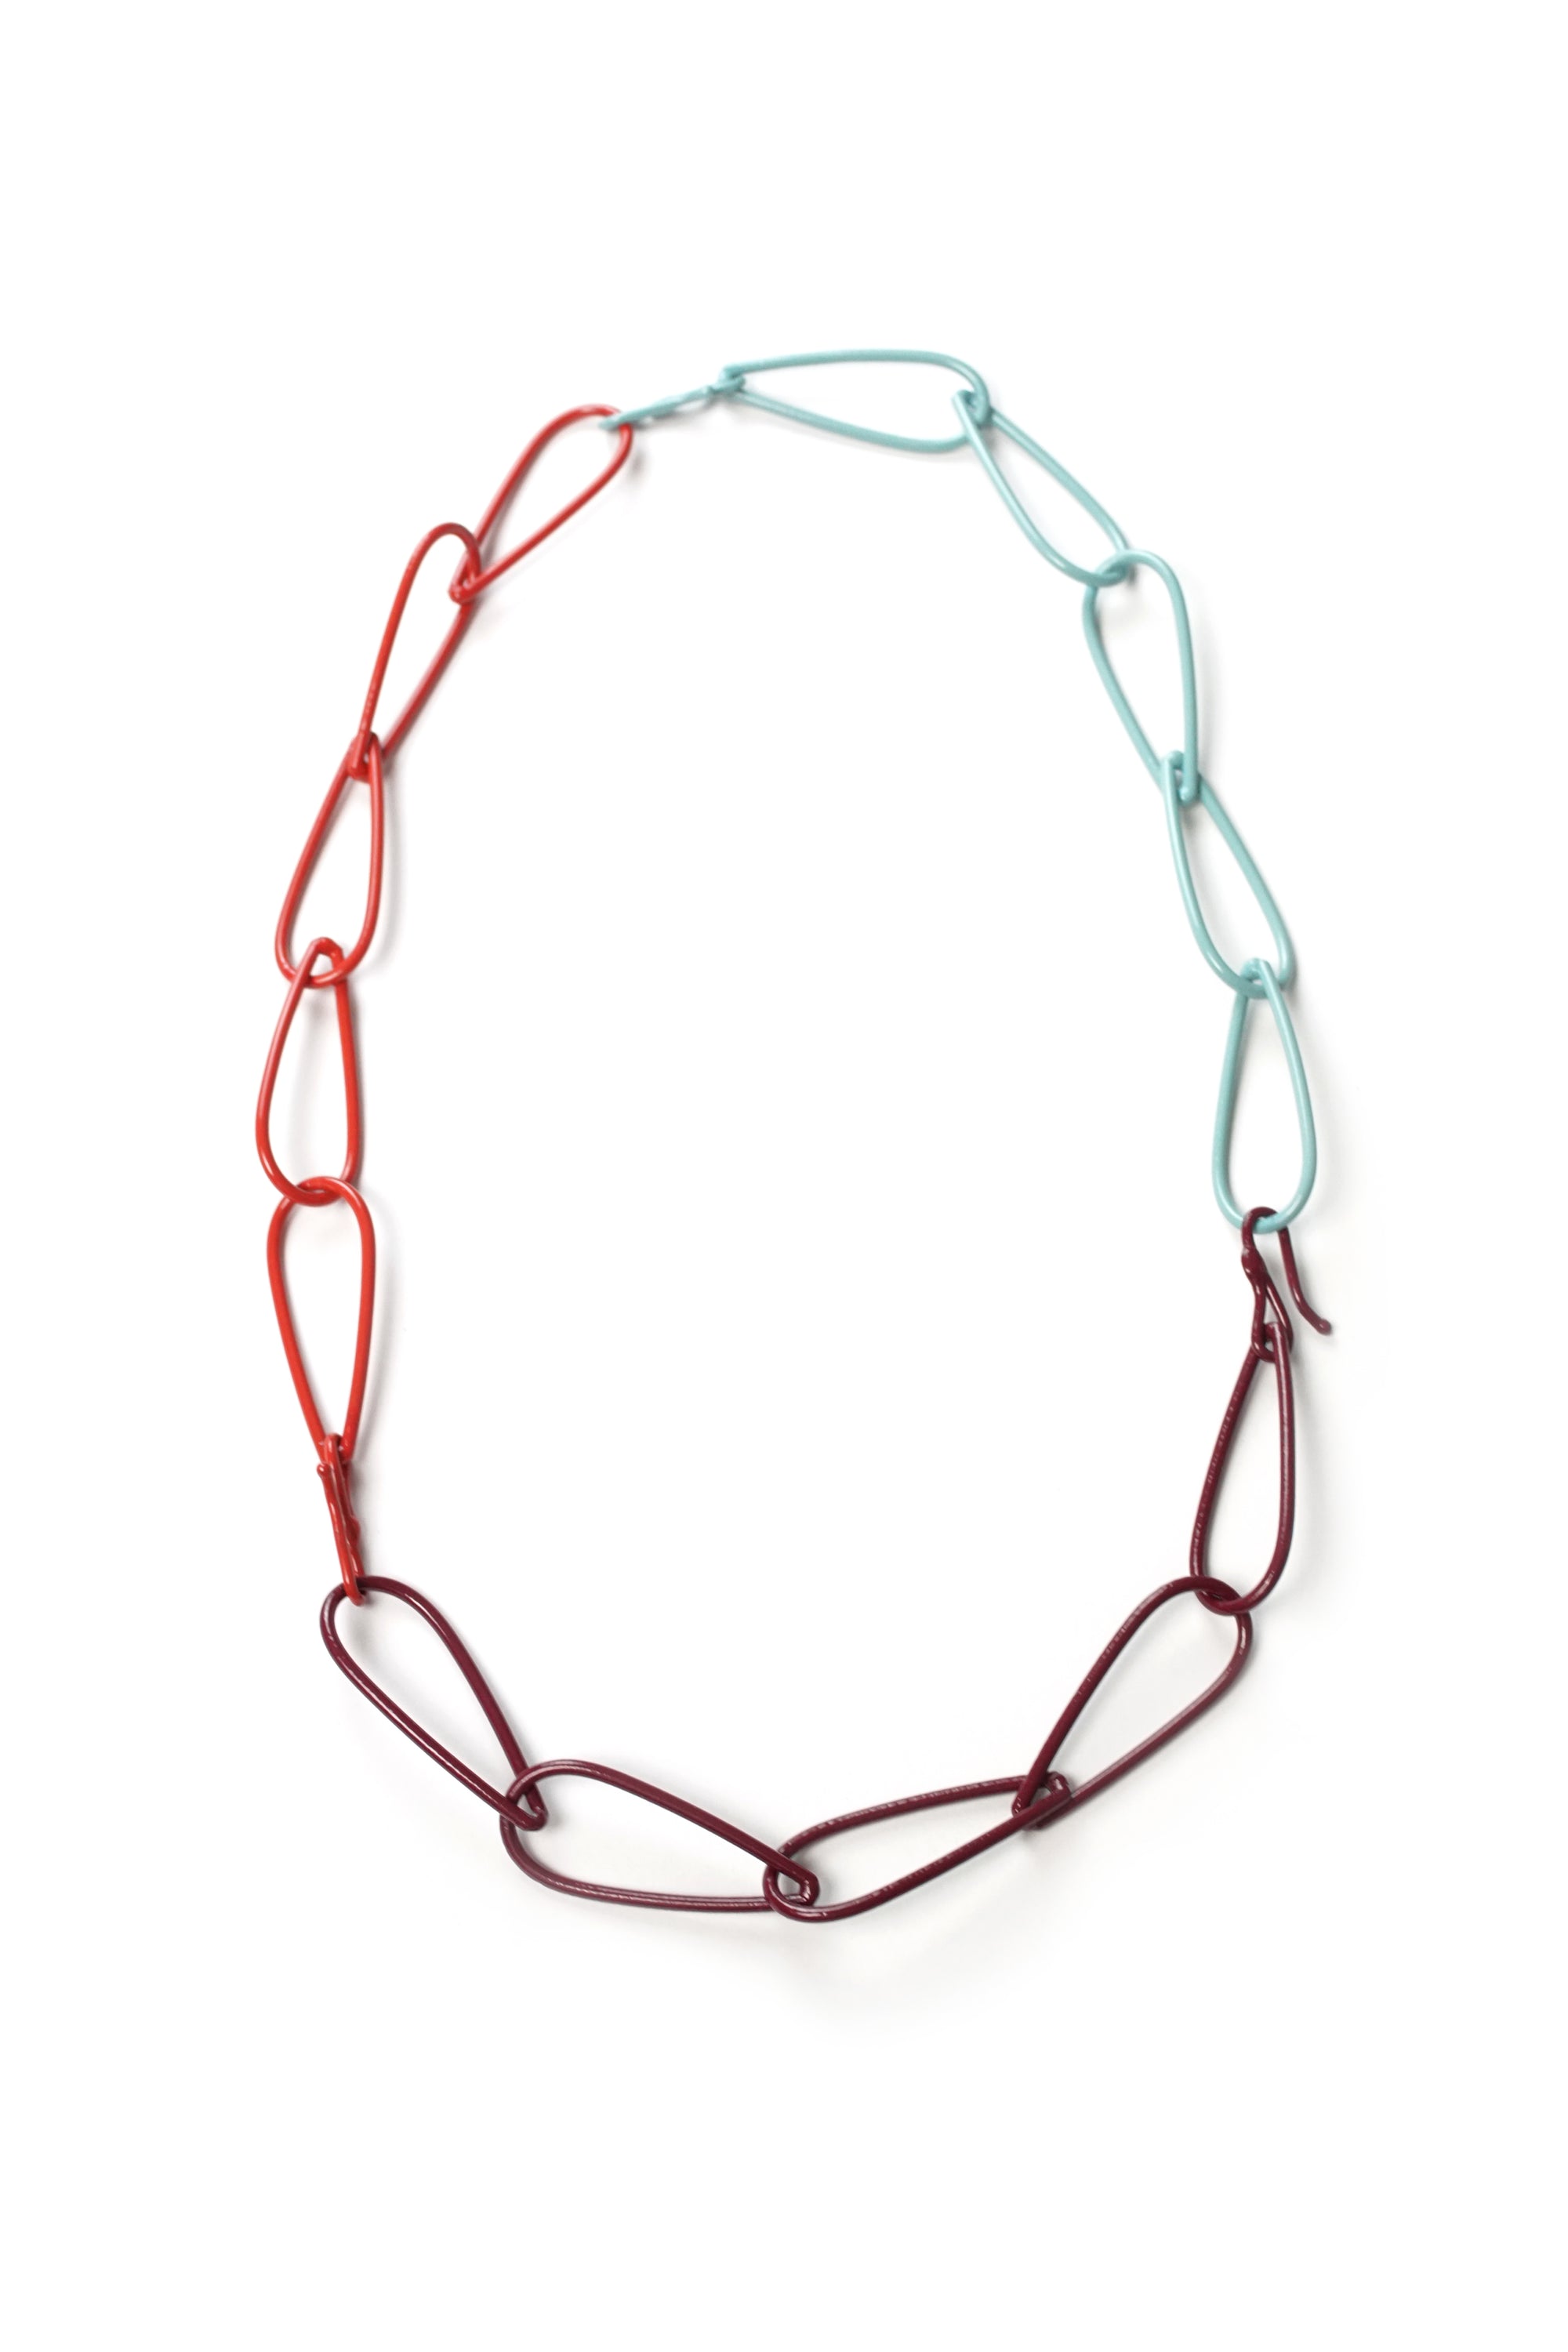 Modular Necklace in Lush Burgundy, Coral Red, and Faded Teal